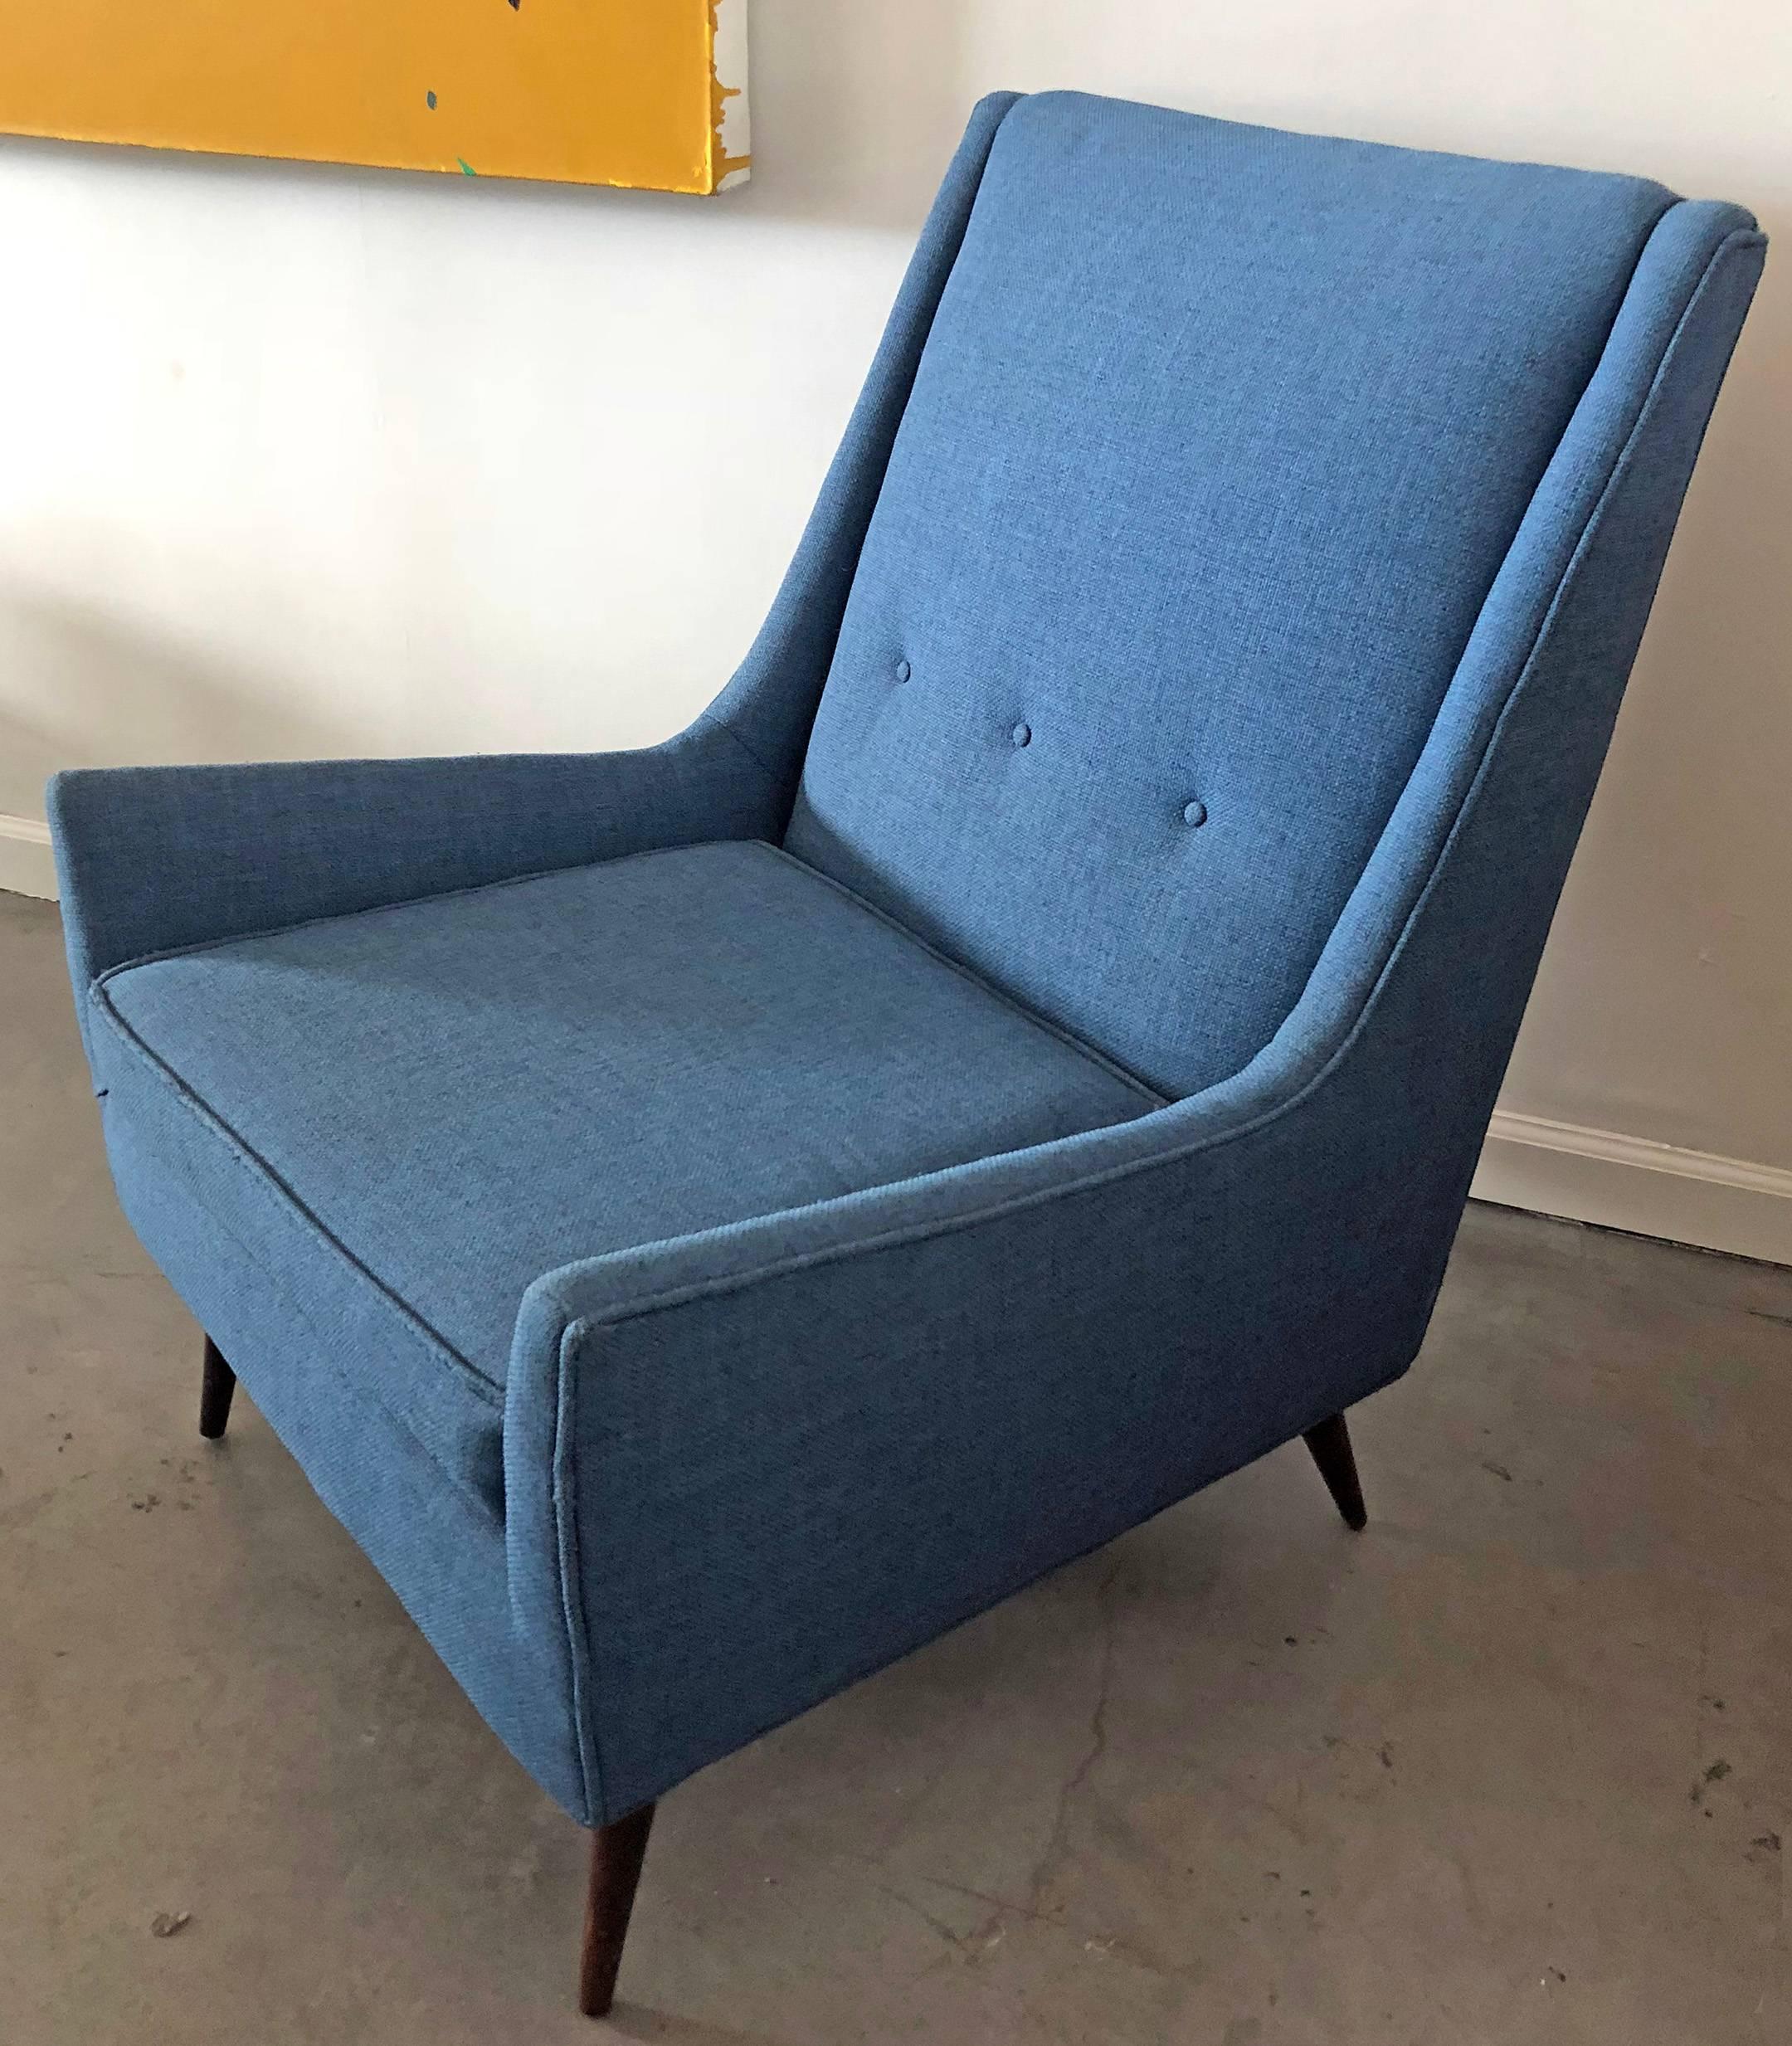 Often attributed to Paul McCobb, this stunning midcentury lounge chair features a clean and timeless design with swooping arms and splayed walnut, Paul McCobb style legs. 

Not only is this piece stunning to look at, it's also quite comfortable!